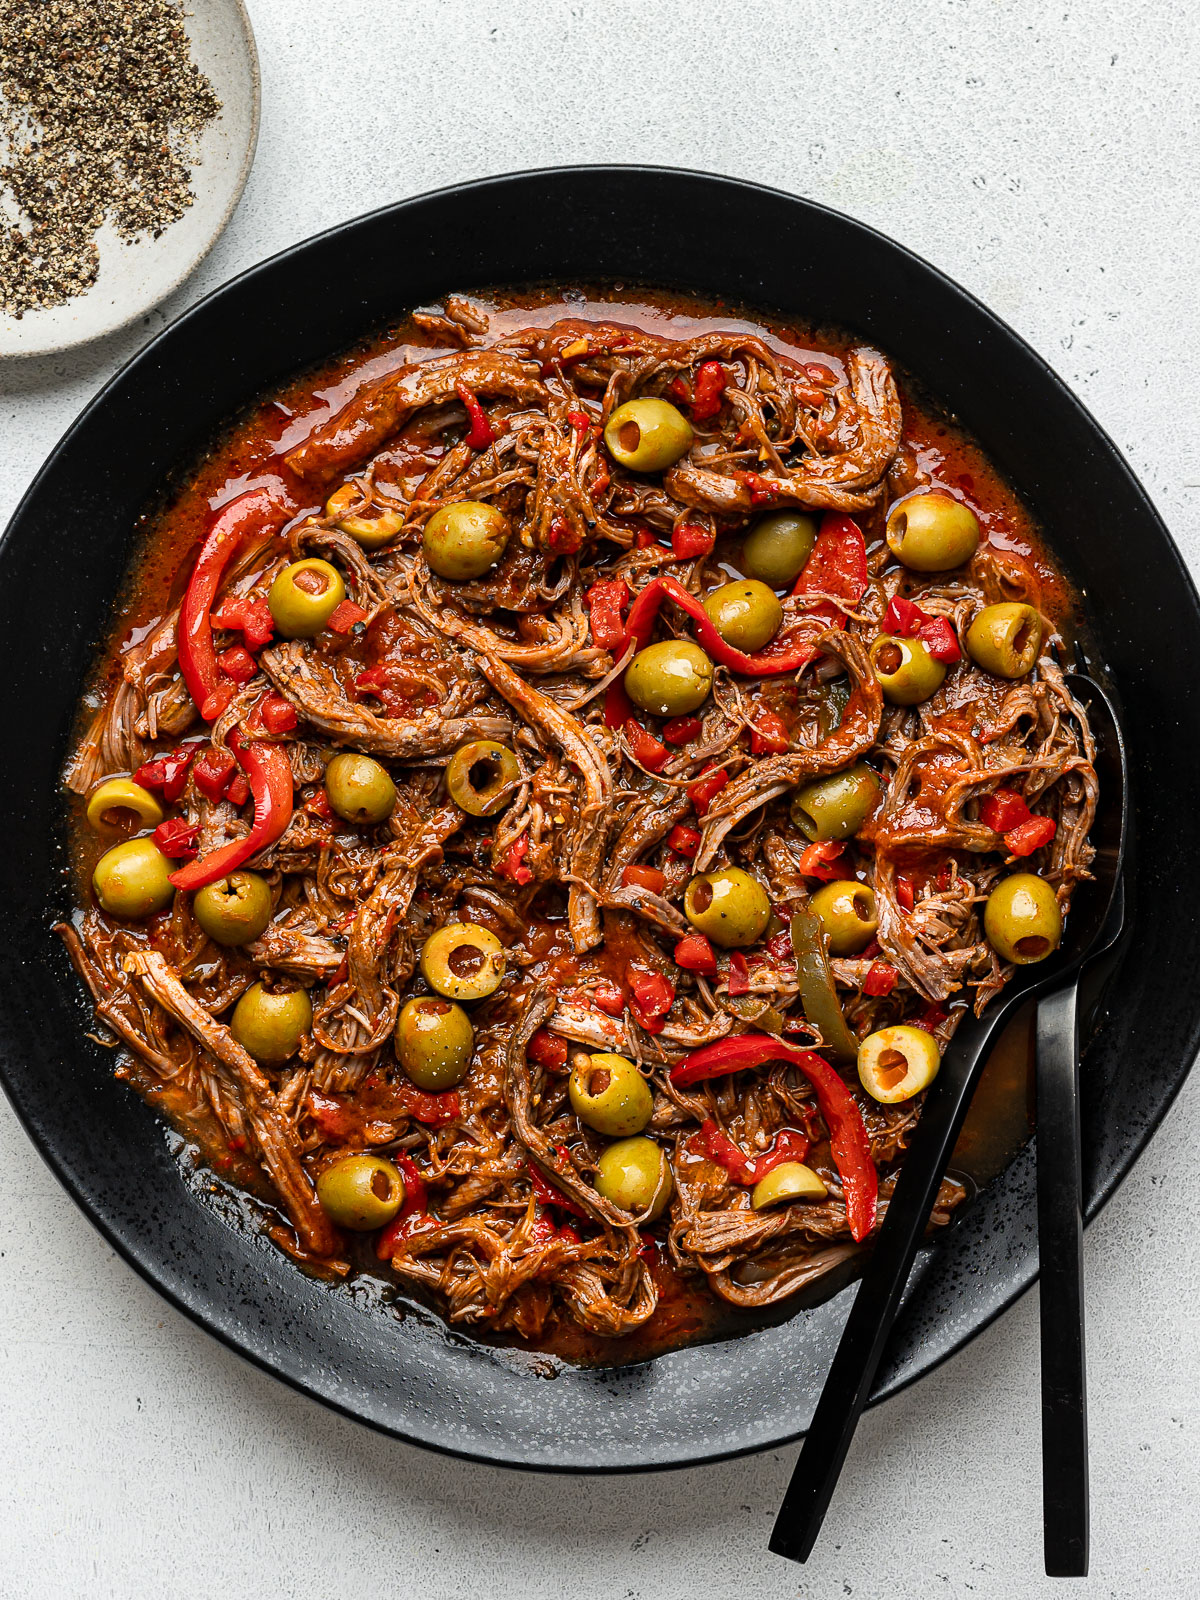 Ropa Vieja garnished with pimentos and olives served on a black round platter with black serving fork and spoon